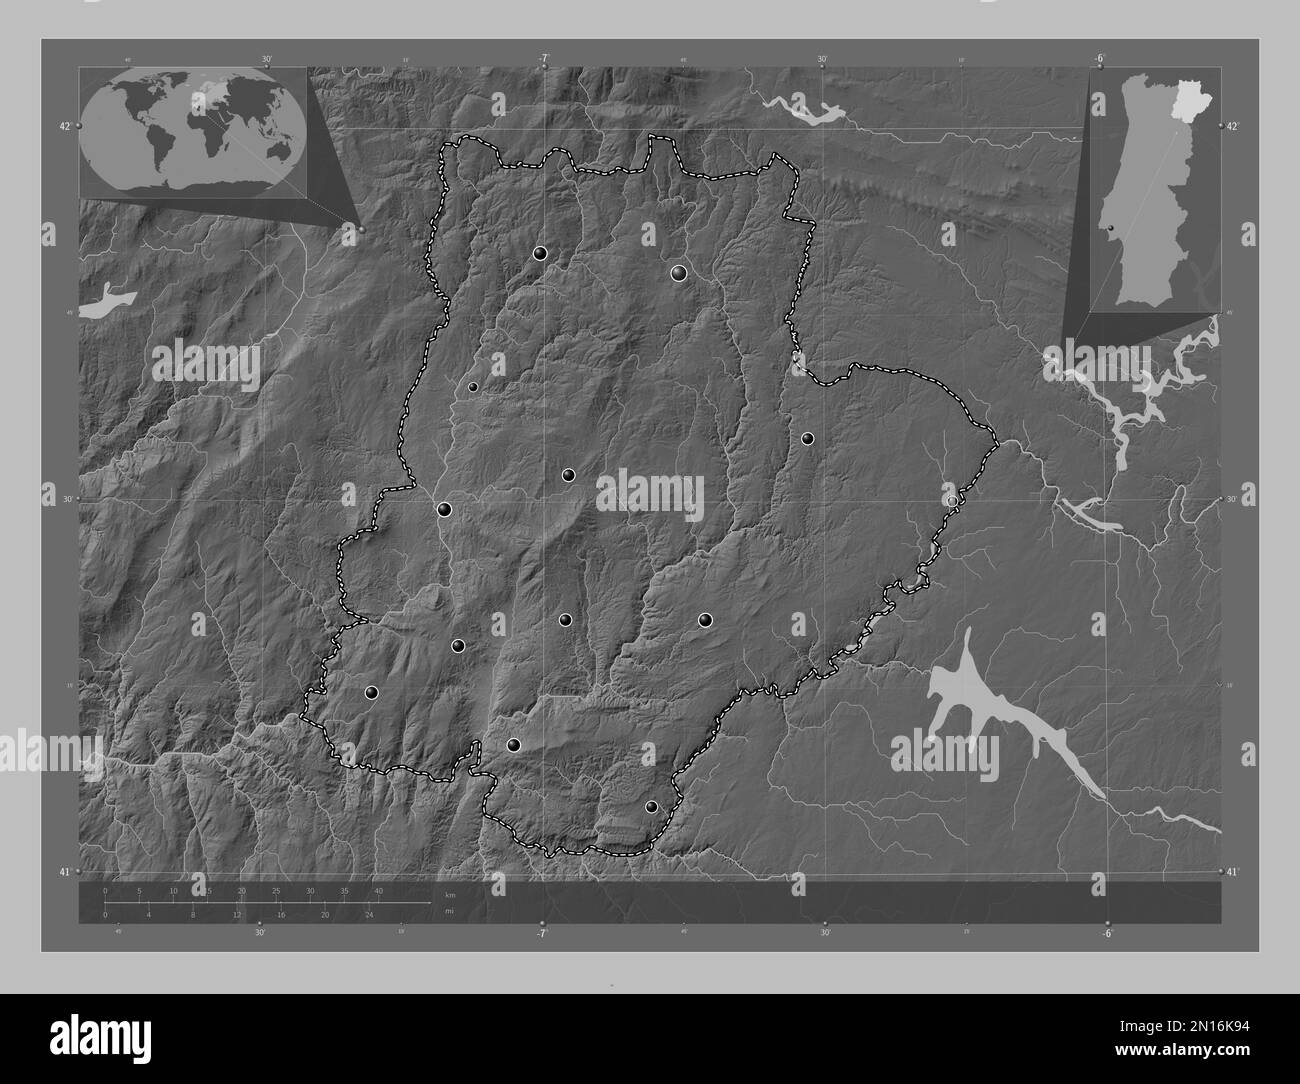 Braganca, district of Portugal. Grayscale elevation map with lakes and rivers. Locations of major cities of the region. Corner auxiliary location maps Stock Photo